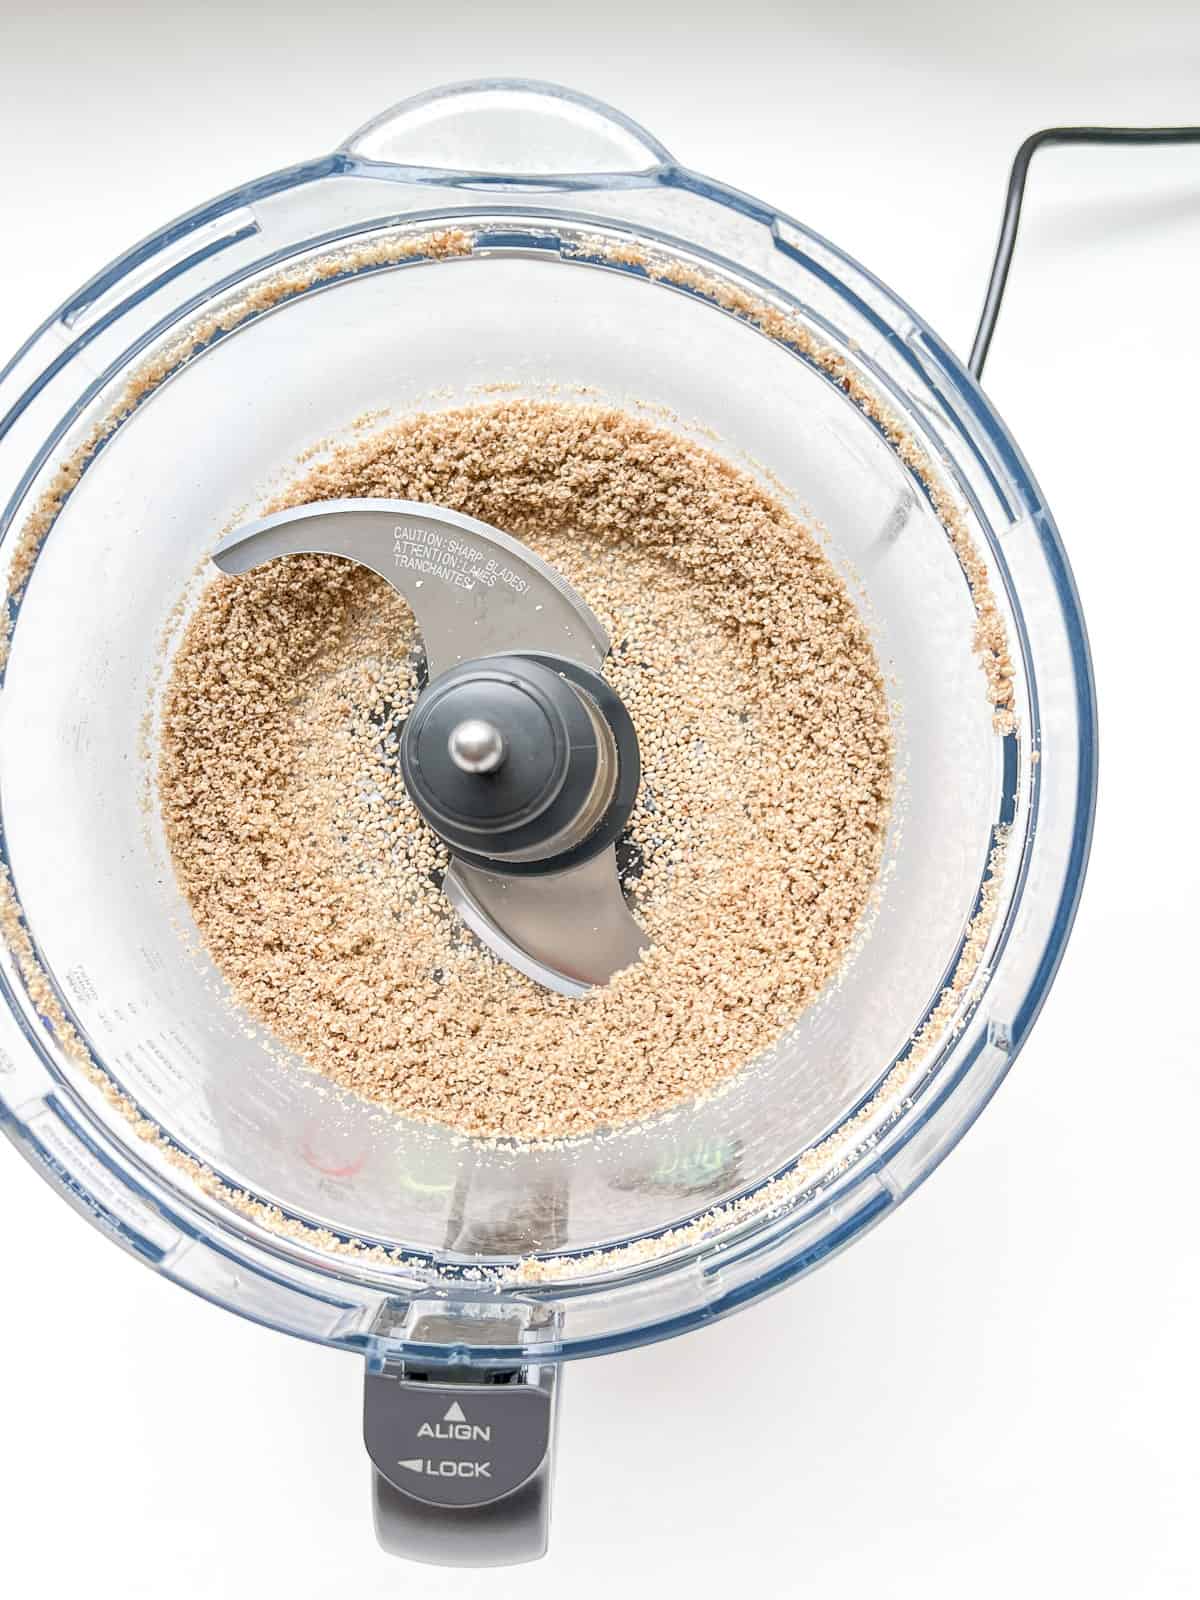 A close up of the bowl of a food processor containing ground sesame seeds and salt.